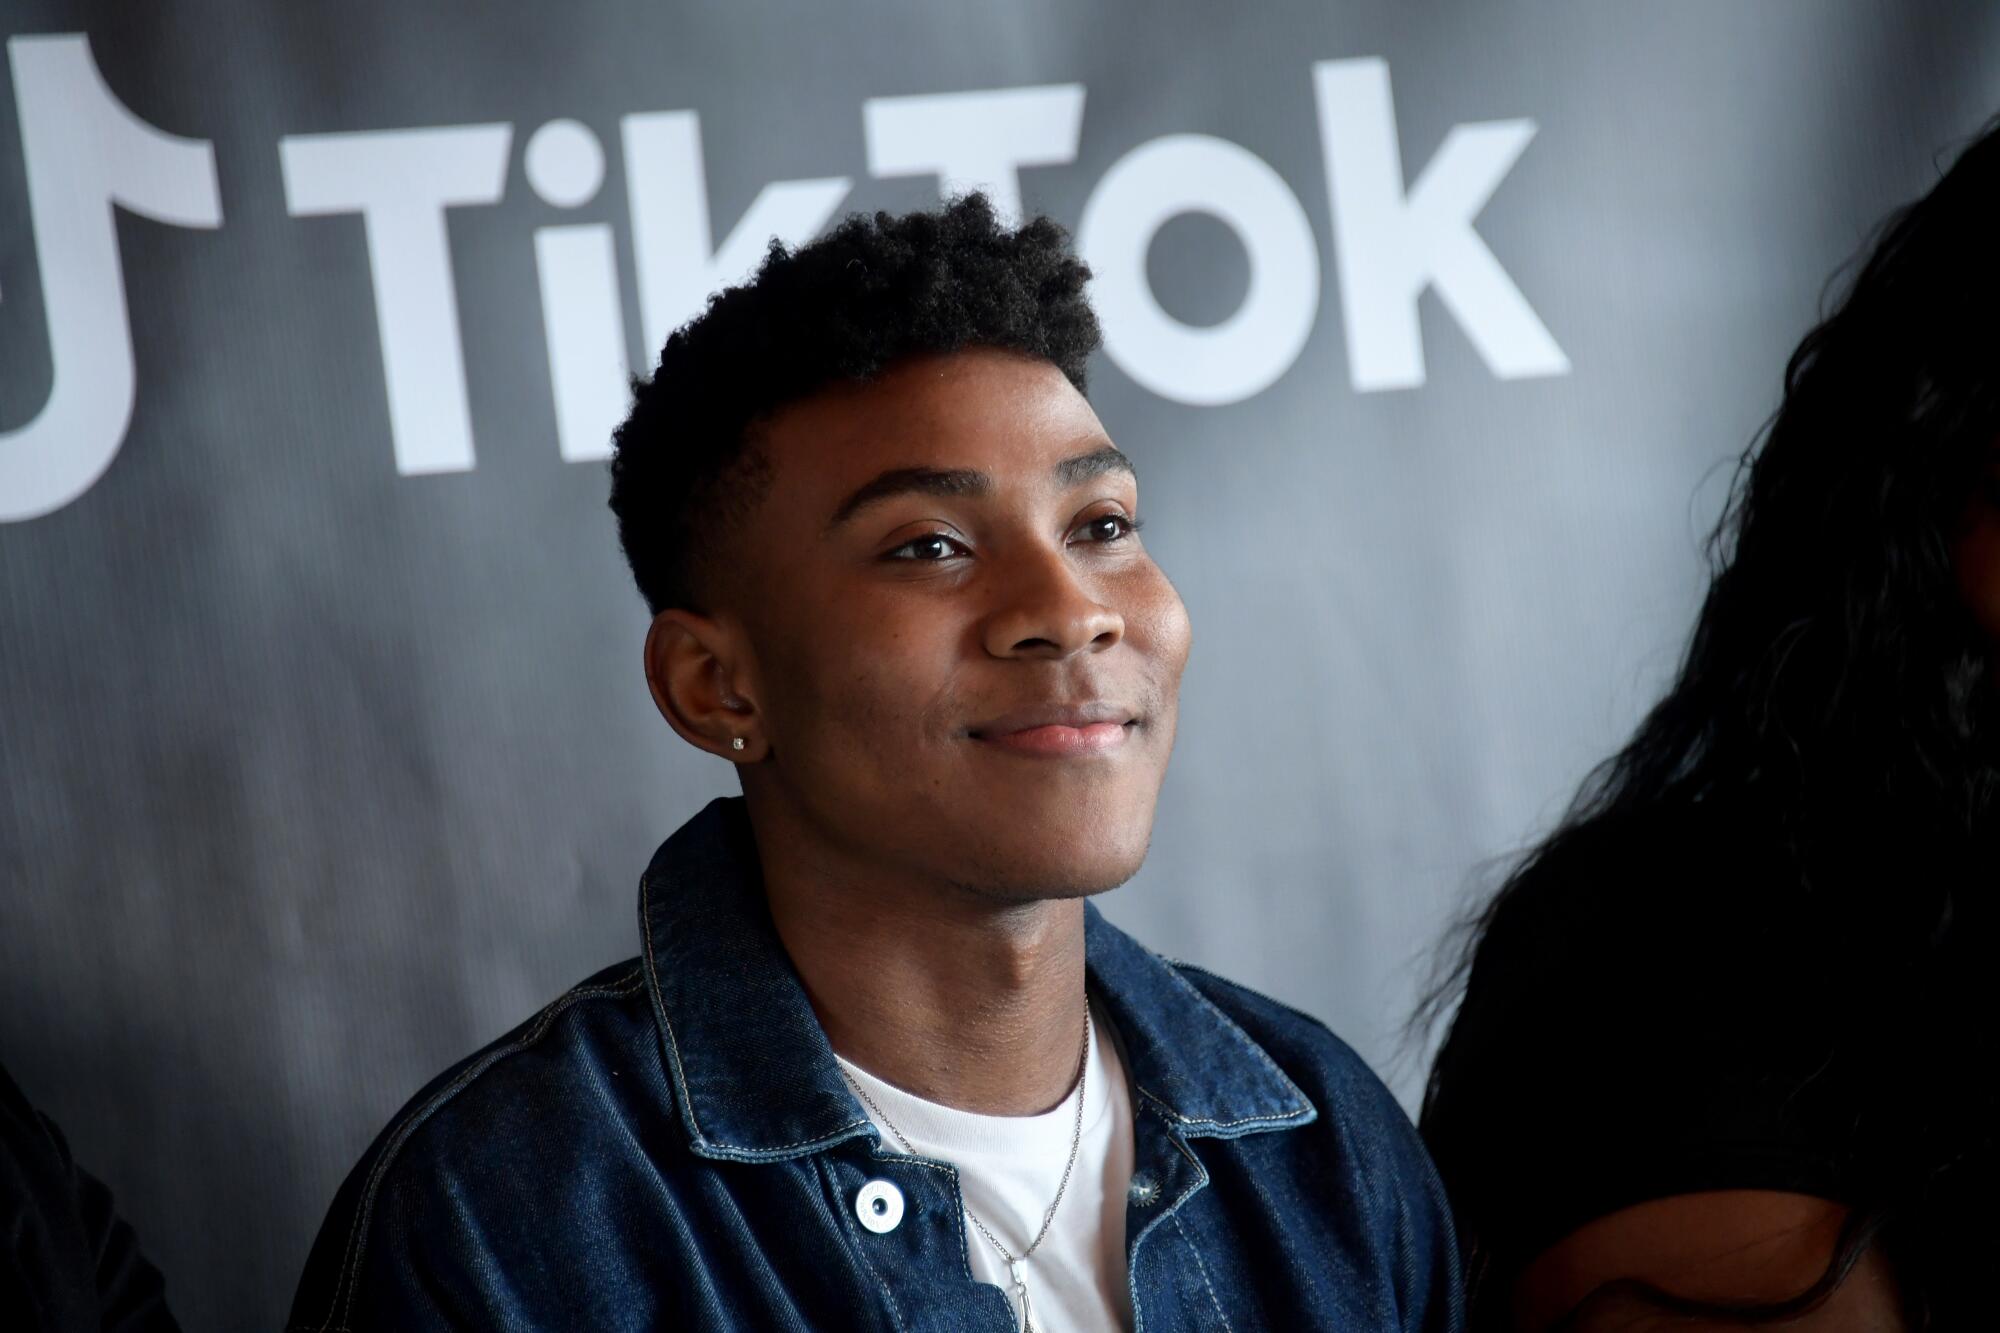 Kahlil Greene smiling in three-quarter profile against a black background with the TikTok logo in white type